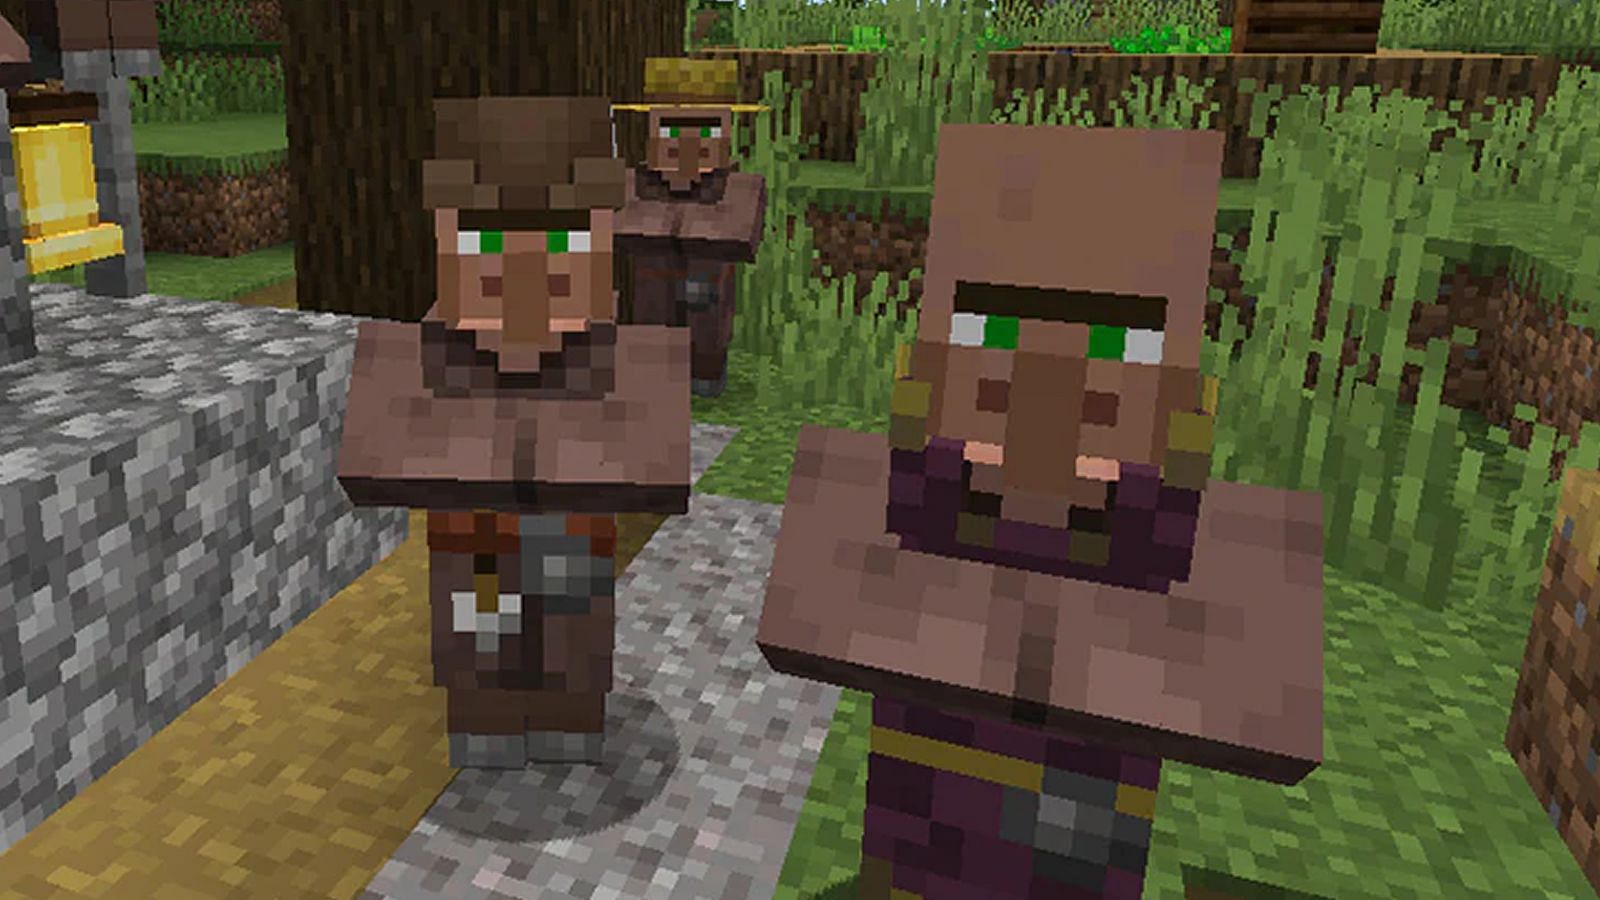 An image of several villagers in-game (Image via Minecraft)